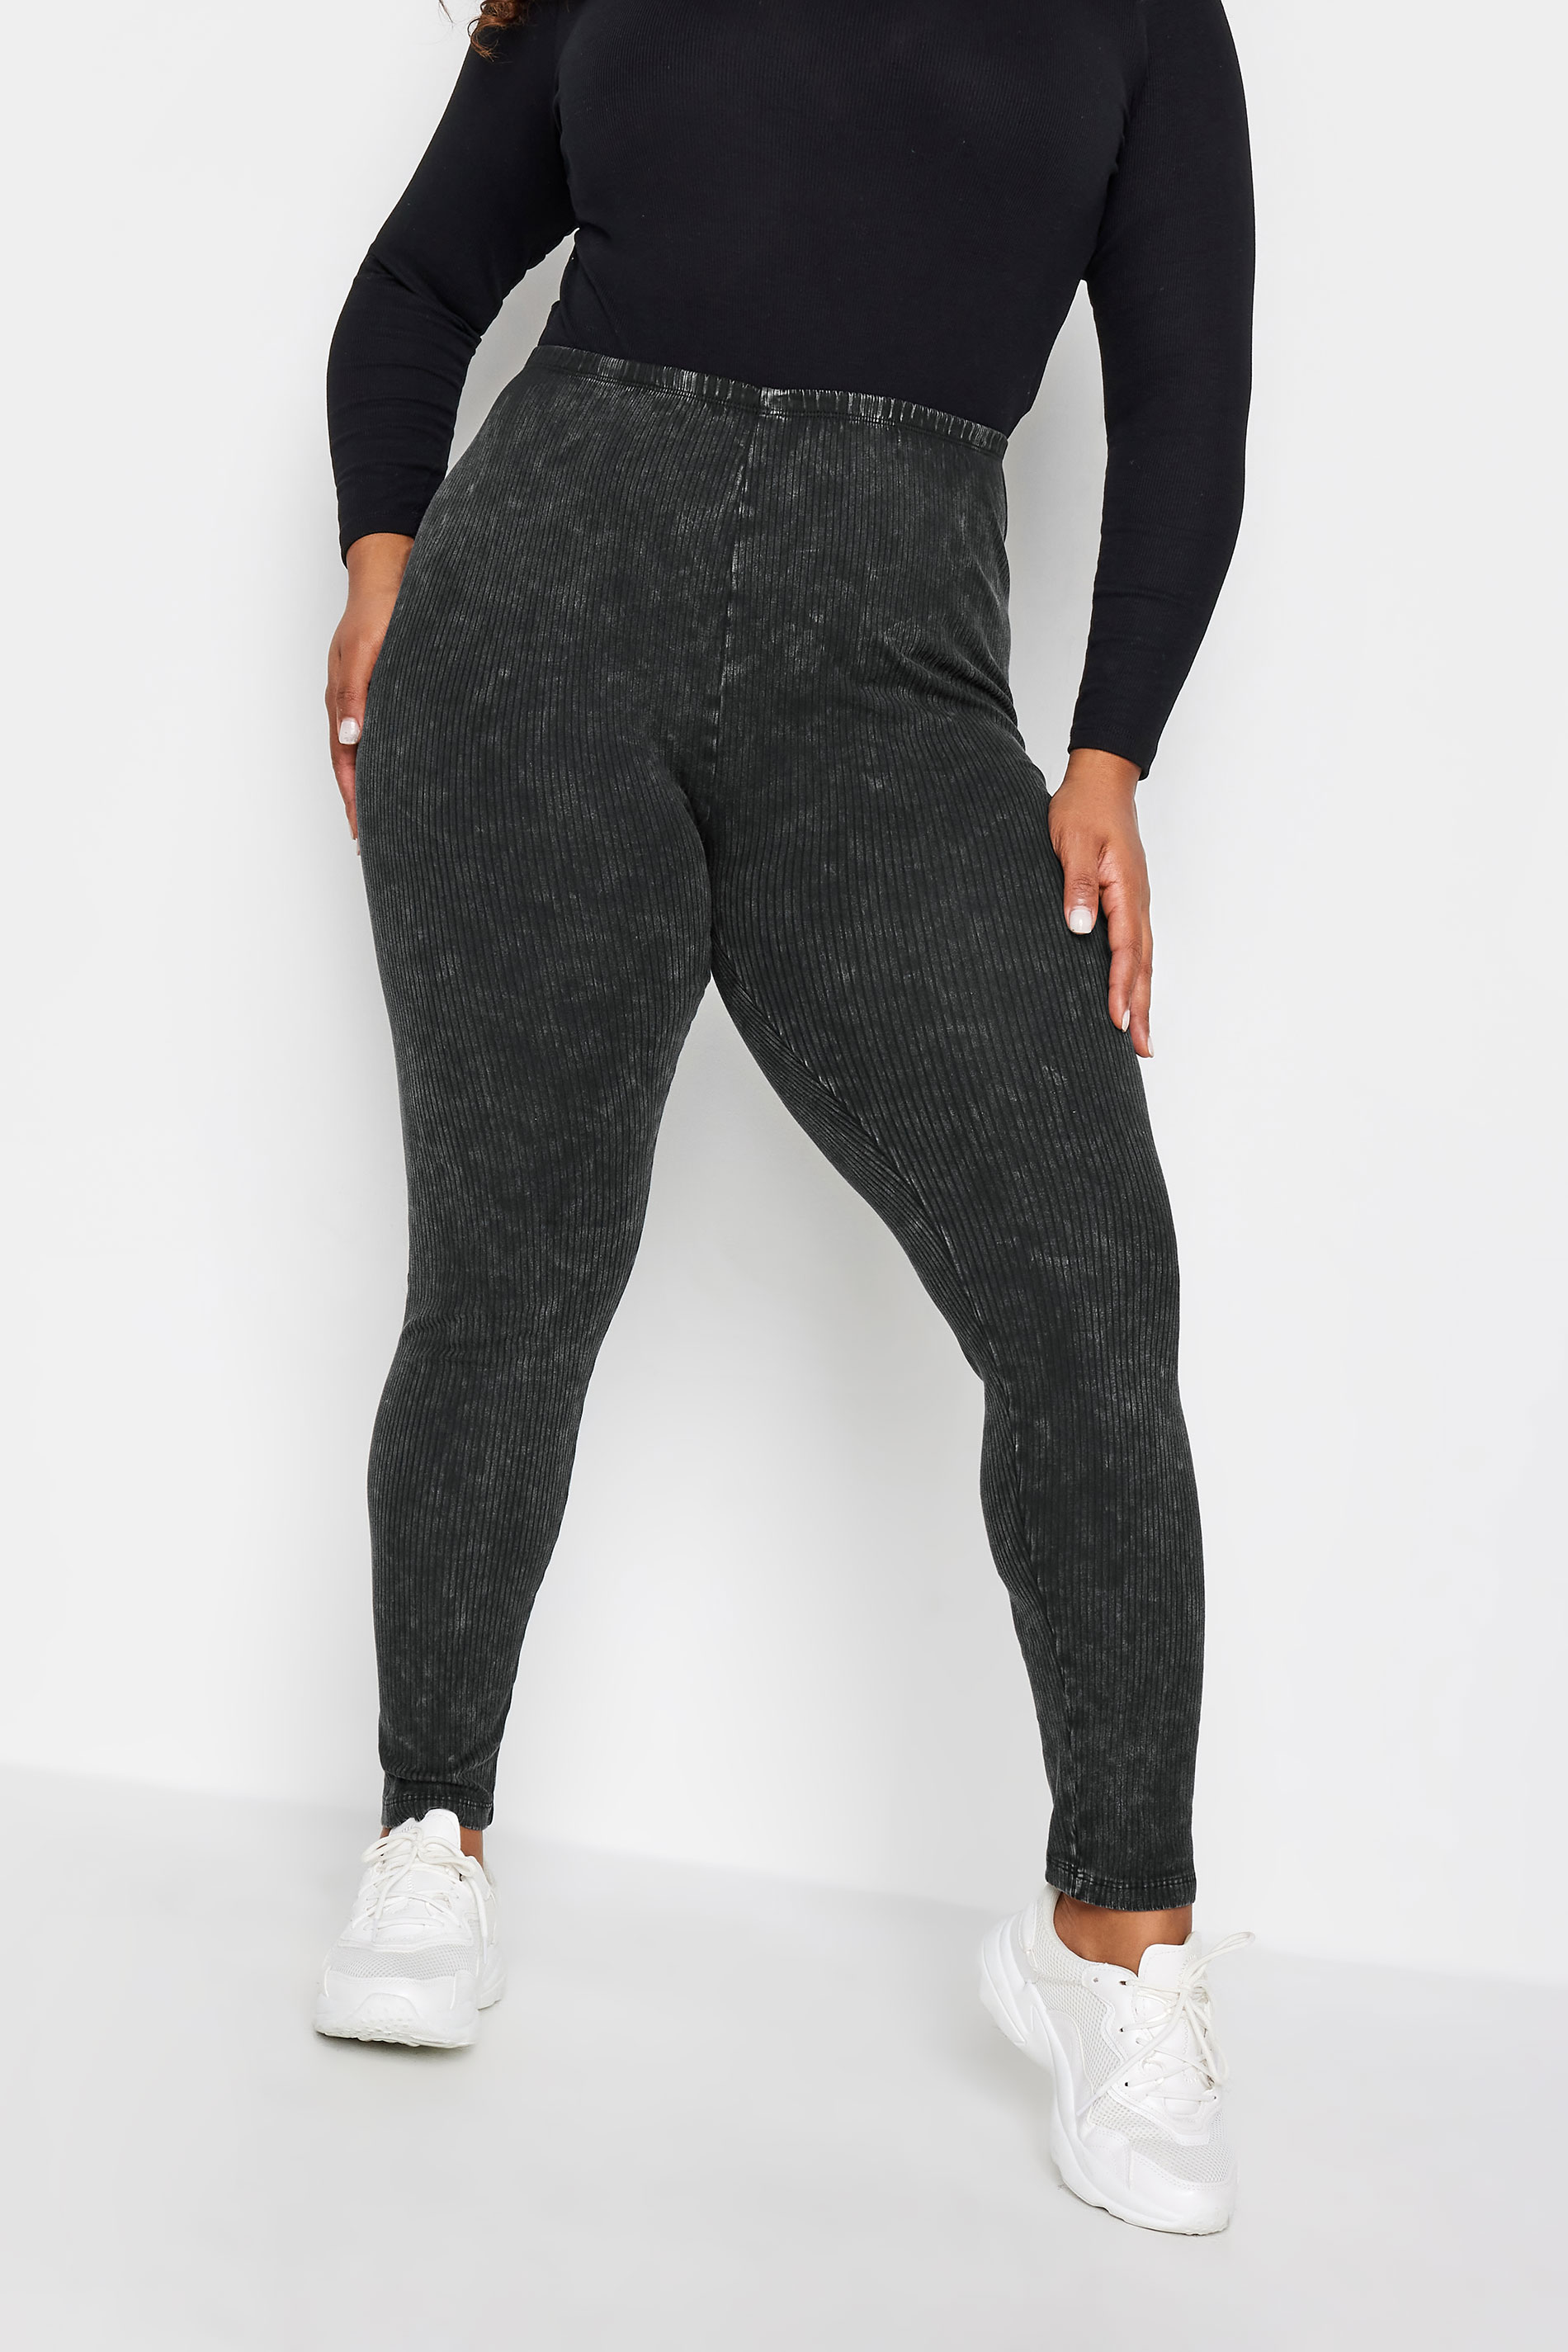 Forever 21, Pants & Jumpsuits, Forever 2 Corduroy Textured Leggings